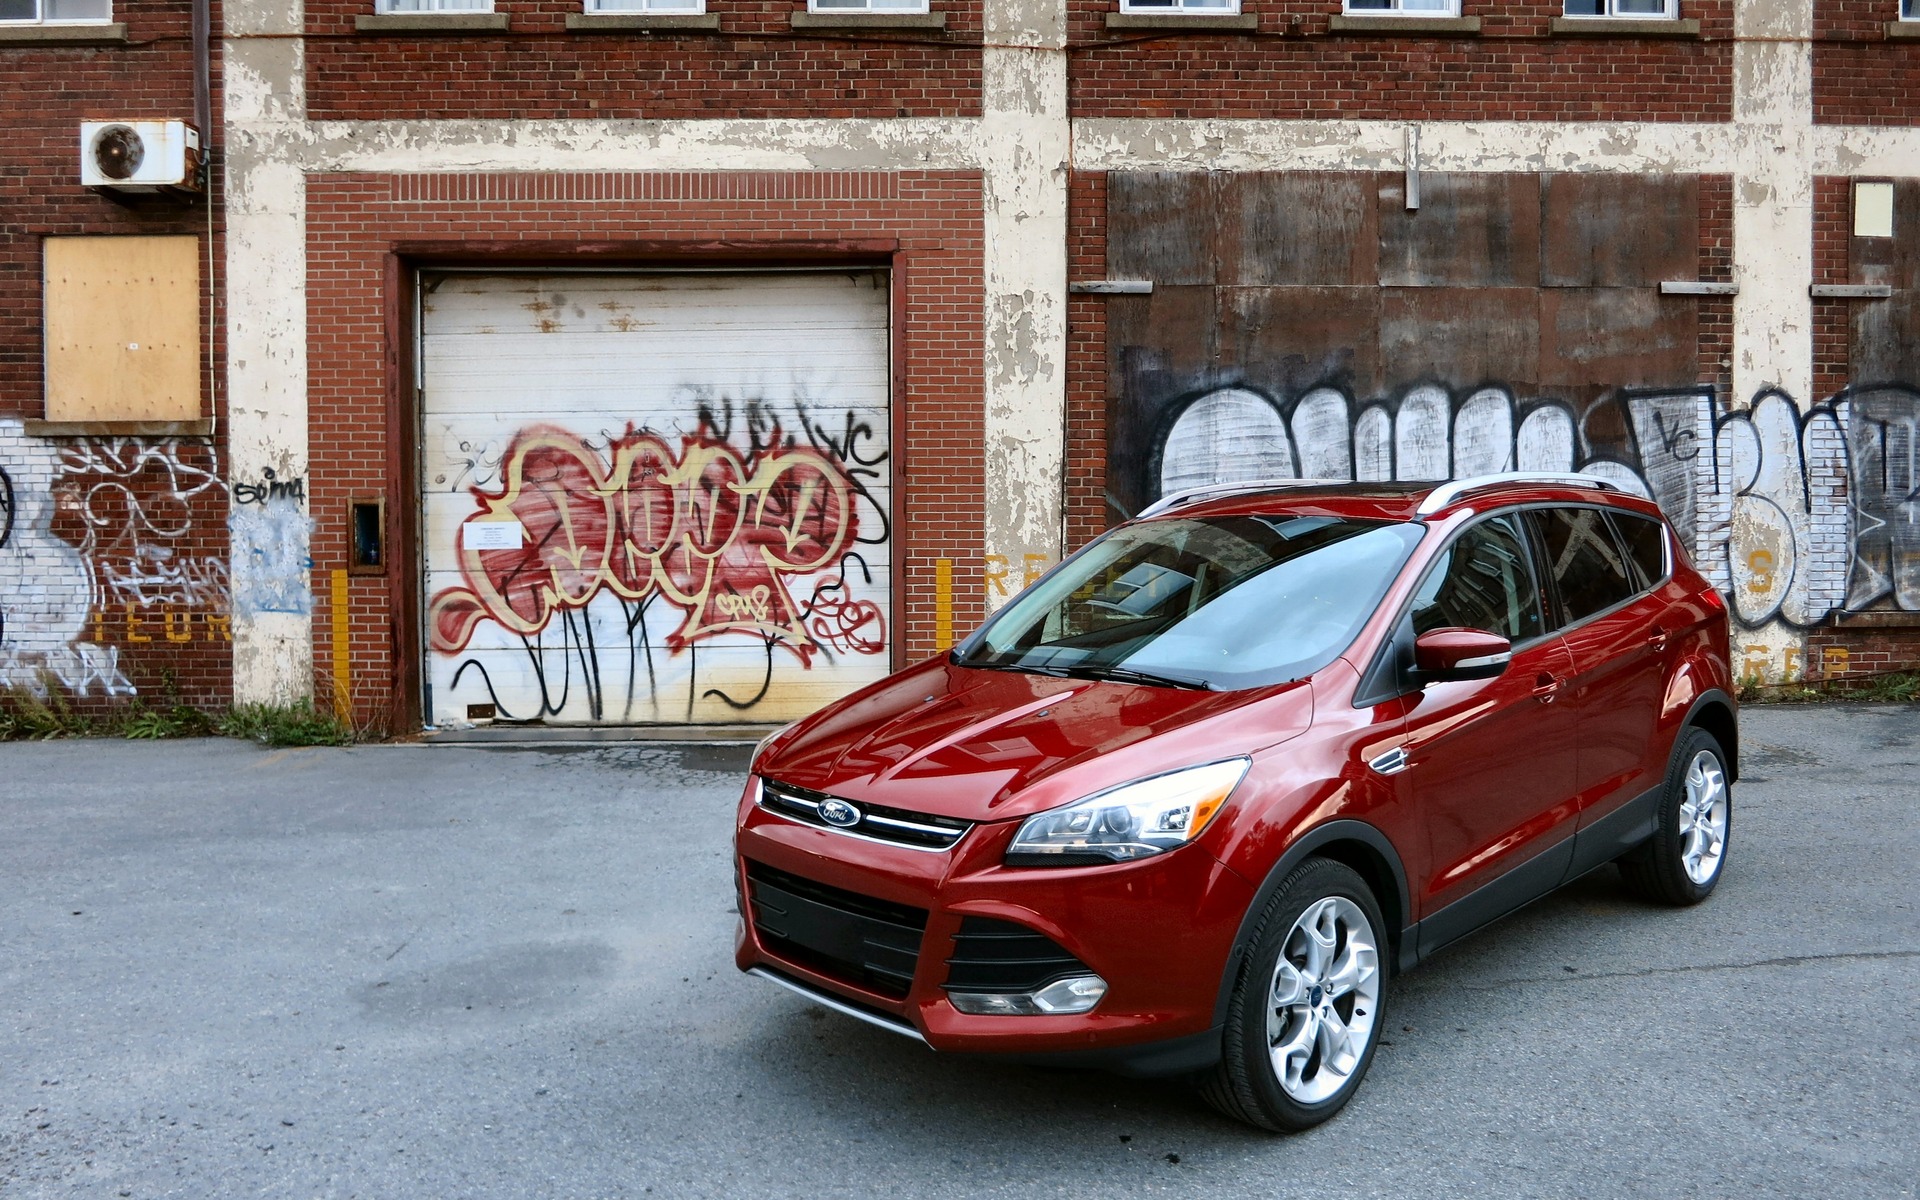 The Escape starts at just over $26k for the entry-level S model.